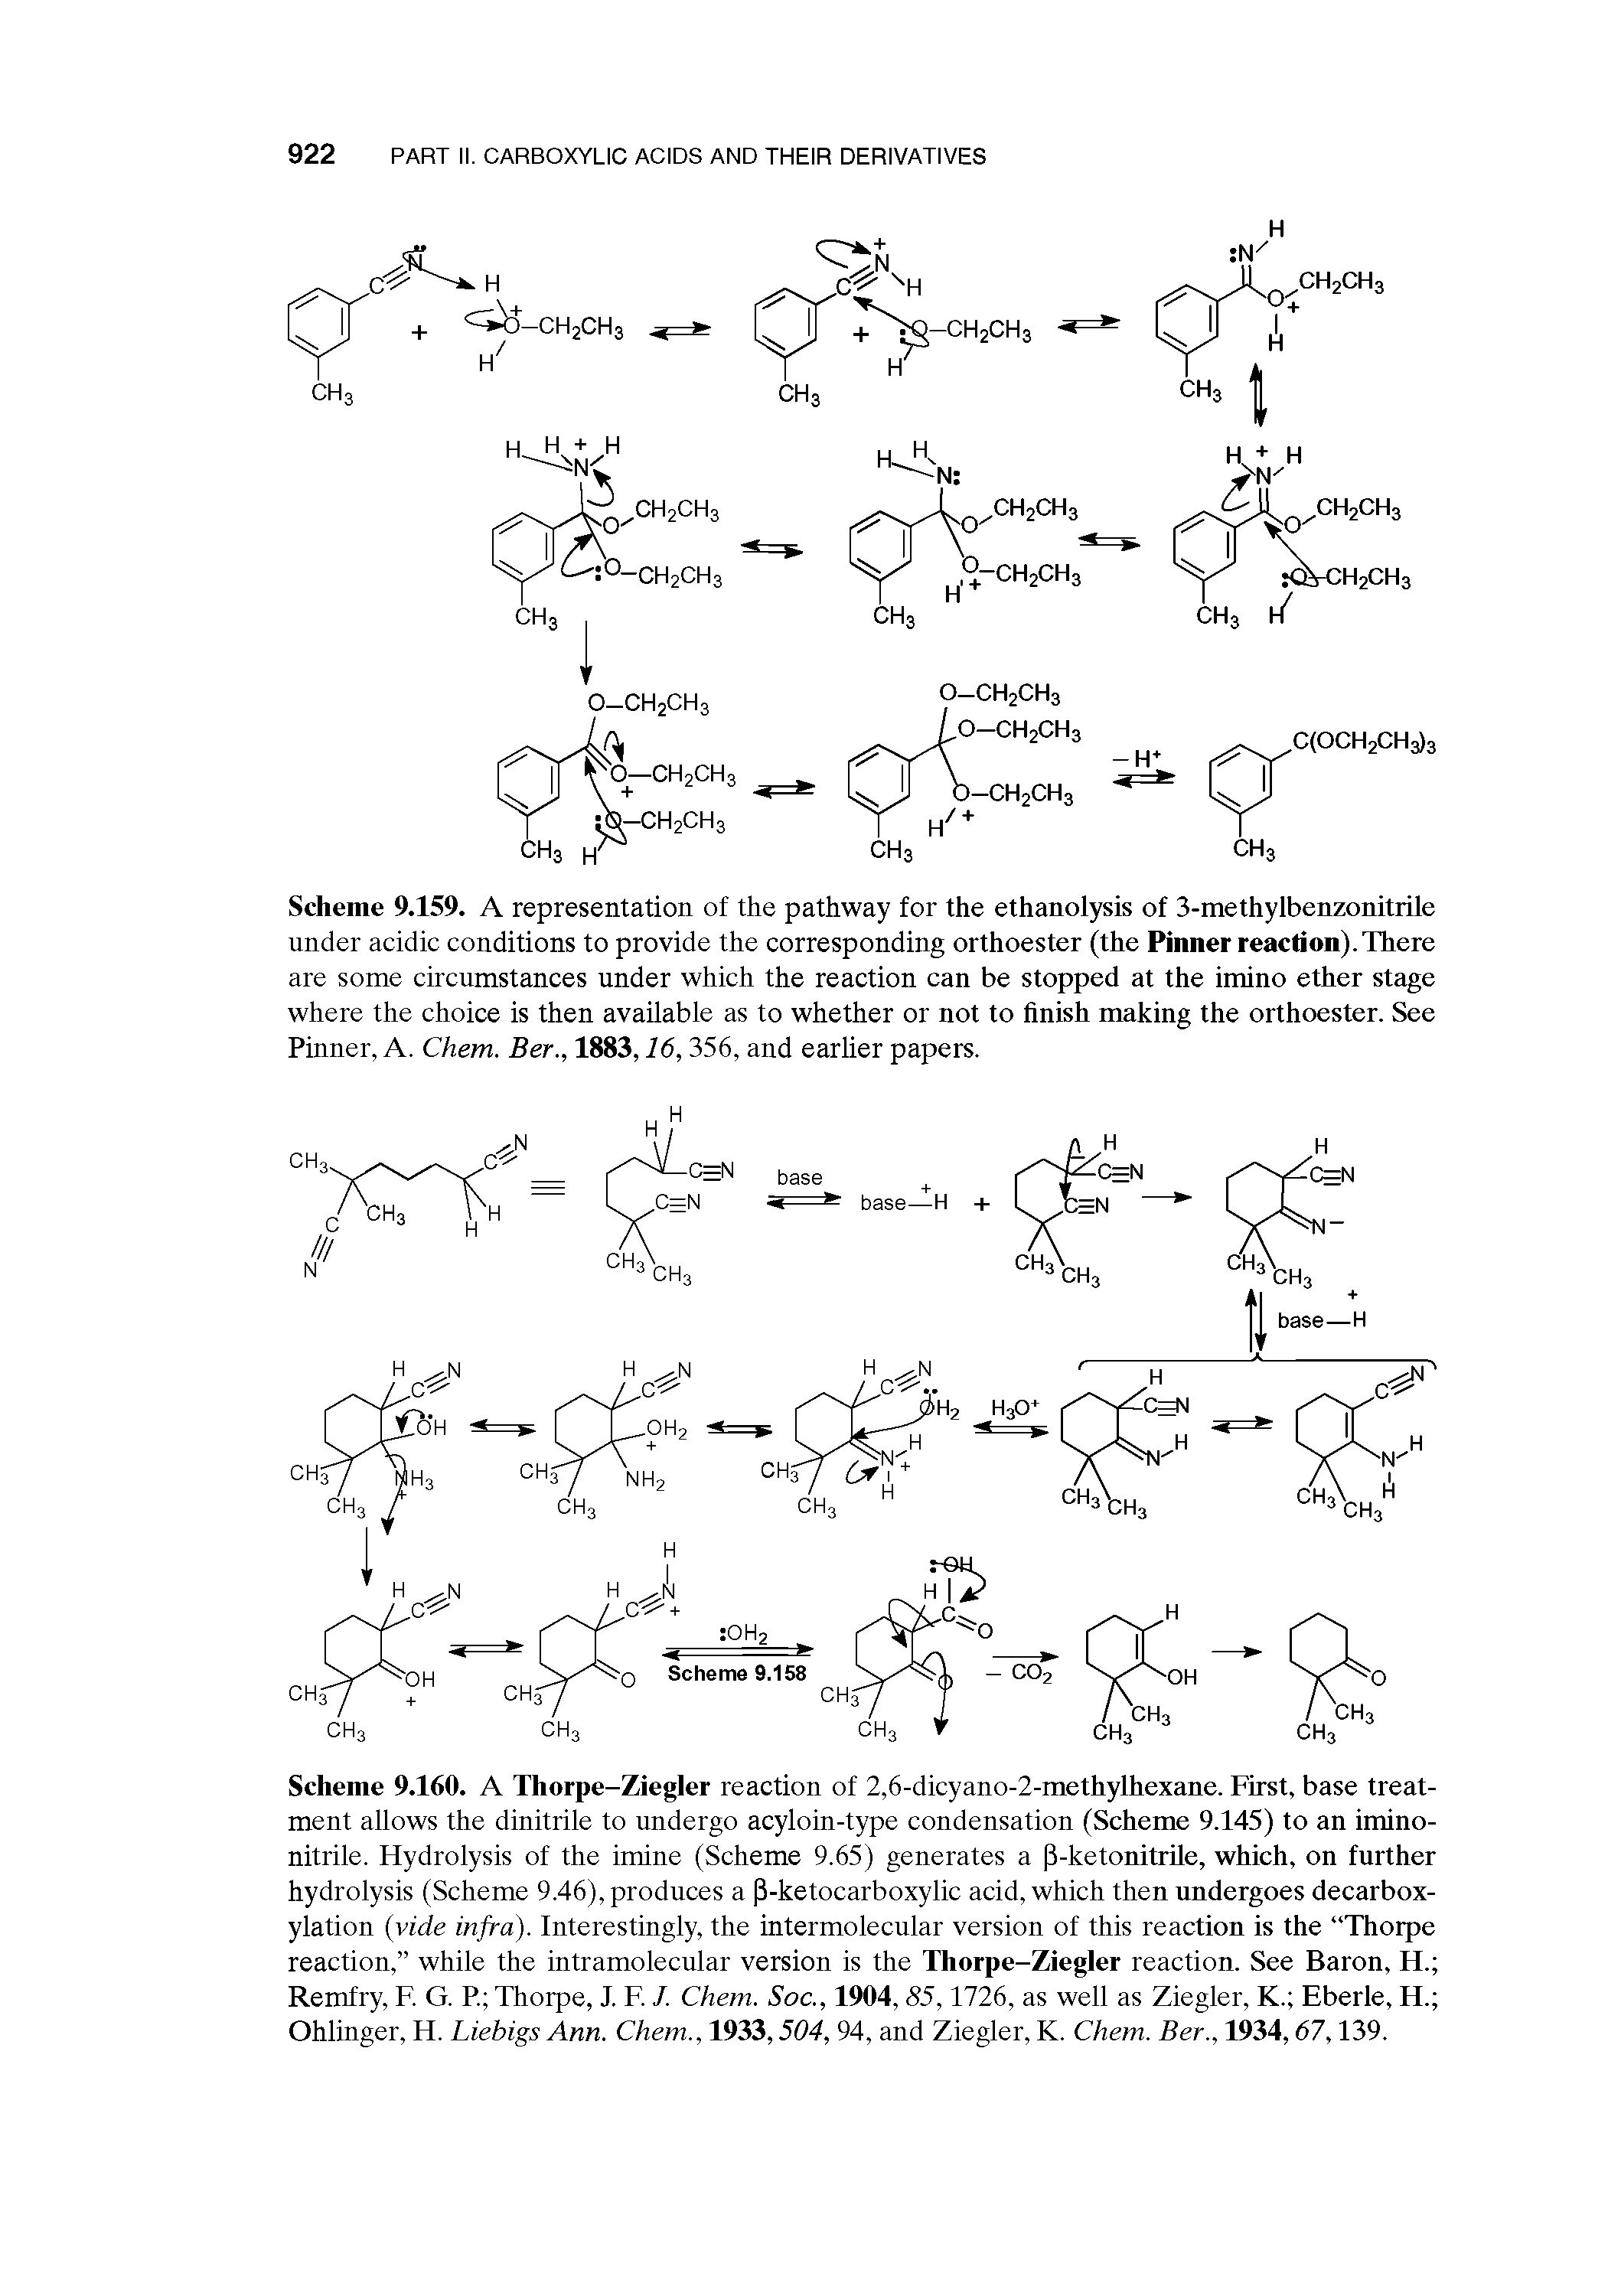 Scheme 9.160. A Thorpe-Ziegler reaction of 2,6-dicyano-2-methylhexane. First, base treatment allows the dinitrile to undergo acyloin-type condensation (Scheme 9.145) to an imino-nitrile. Hydrolysis of the imine (Scheme 9.65) generates a P-ketonitrUe, which, on further hydrolysis (Scheme 9.46), produces a P-ketocarboxylic acid, which then undergoes decarboxylation (vide infra). Interestingly, the intermolecular version of this reaction is the Thorpe reaction, while the intramolecular version is the Thorpe-Ziegler reaction. See Baron, H. Remfry, F. G. P. Thorpe, J. F. /. Chem. Soc., 1904,85,1726, as well as Ziegler, K. Eberle, H. Ohlinger, H. Liebigs Ann. Chem., 1933,504, 94, and Ziegler, K. Chem. Ber., 1934,67,139.